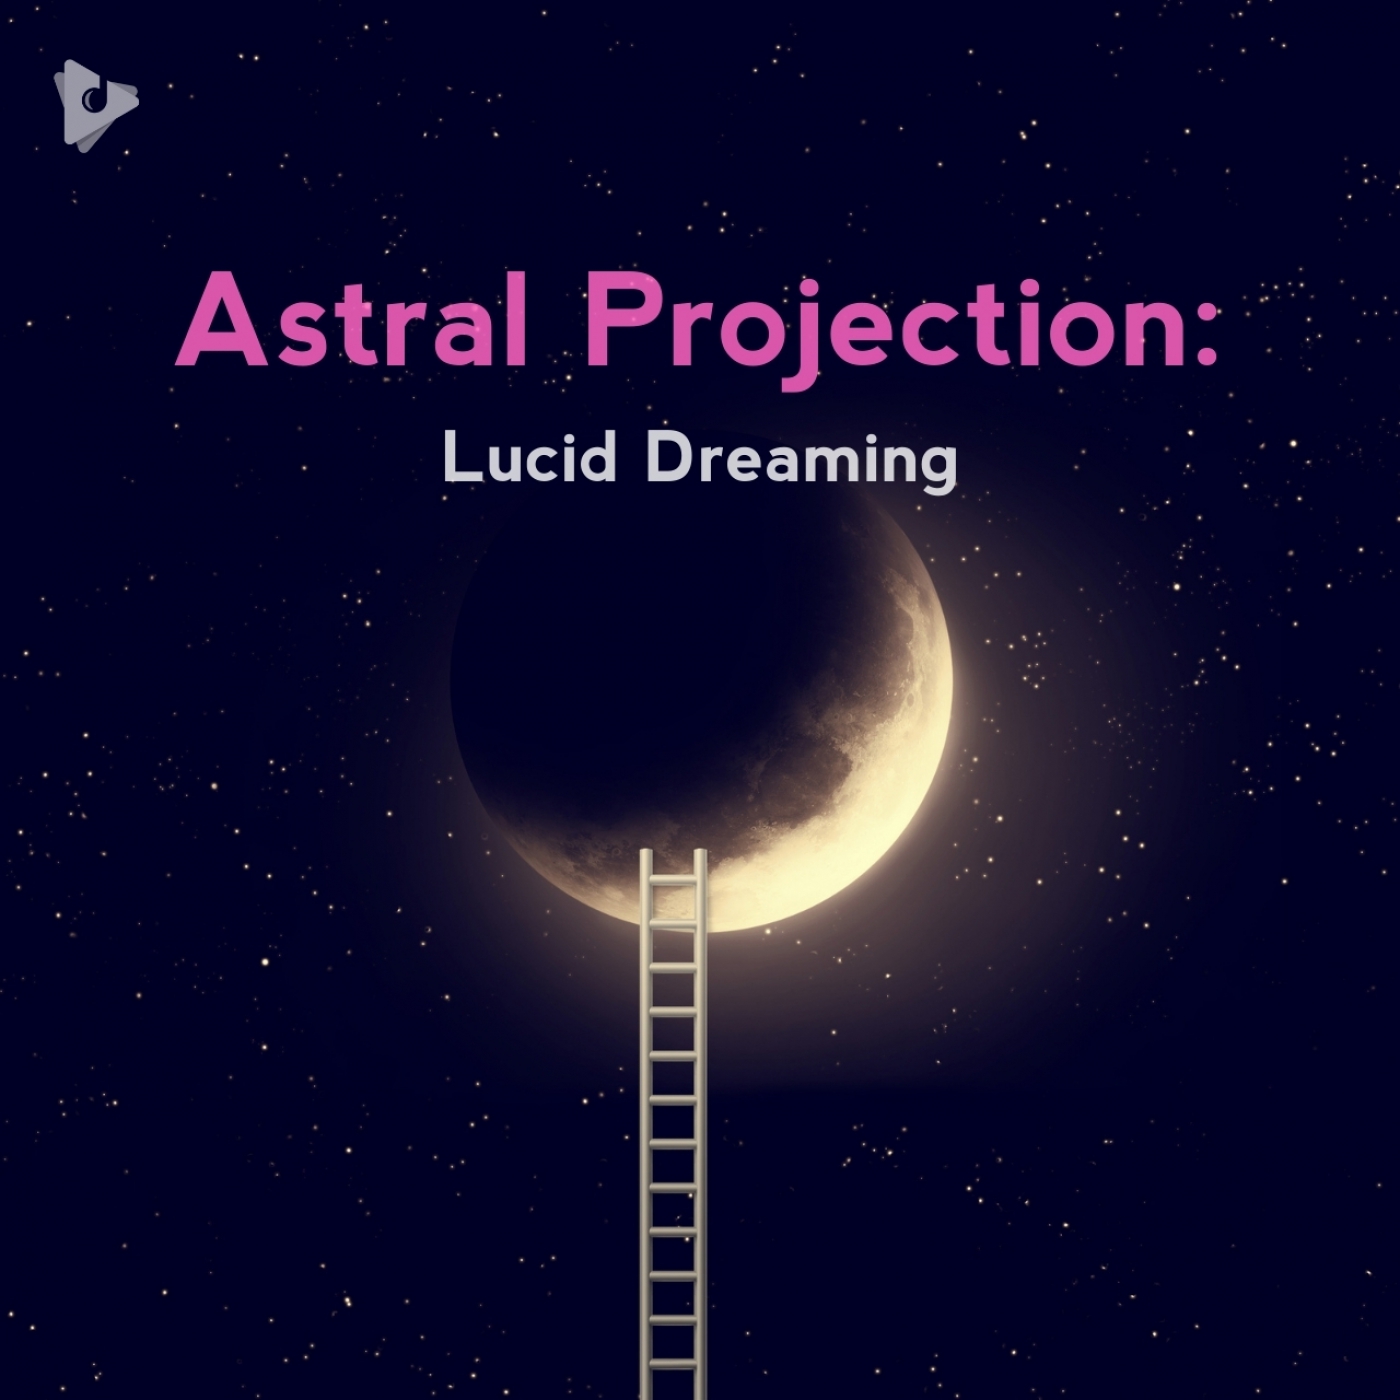 Astral Projection: Lucid Dreaming